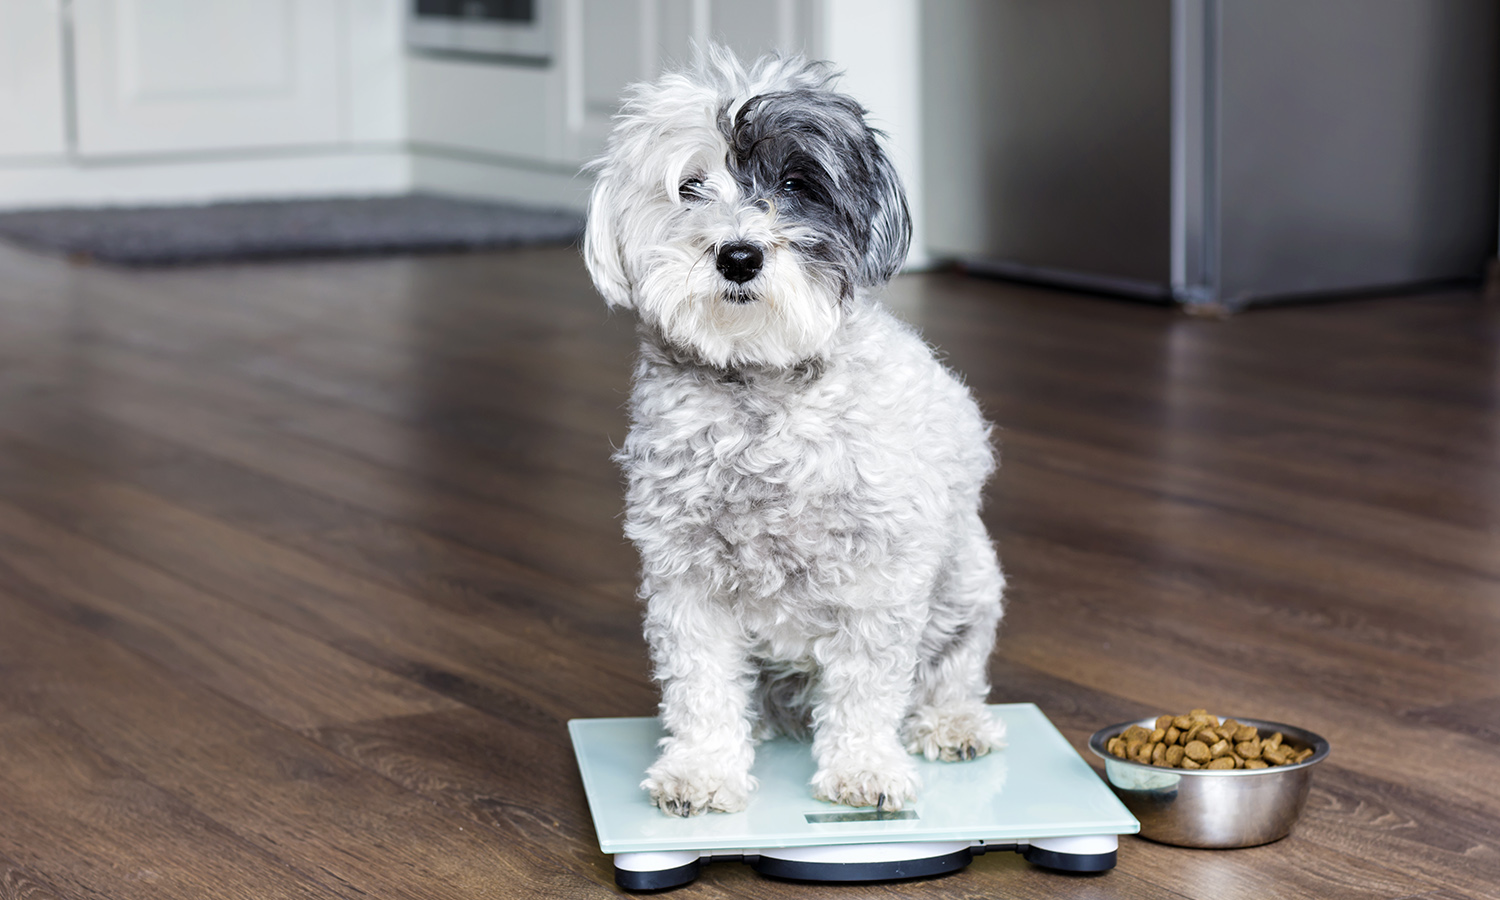 How to manage IBD inflammatory bowel disease for my dog at home